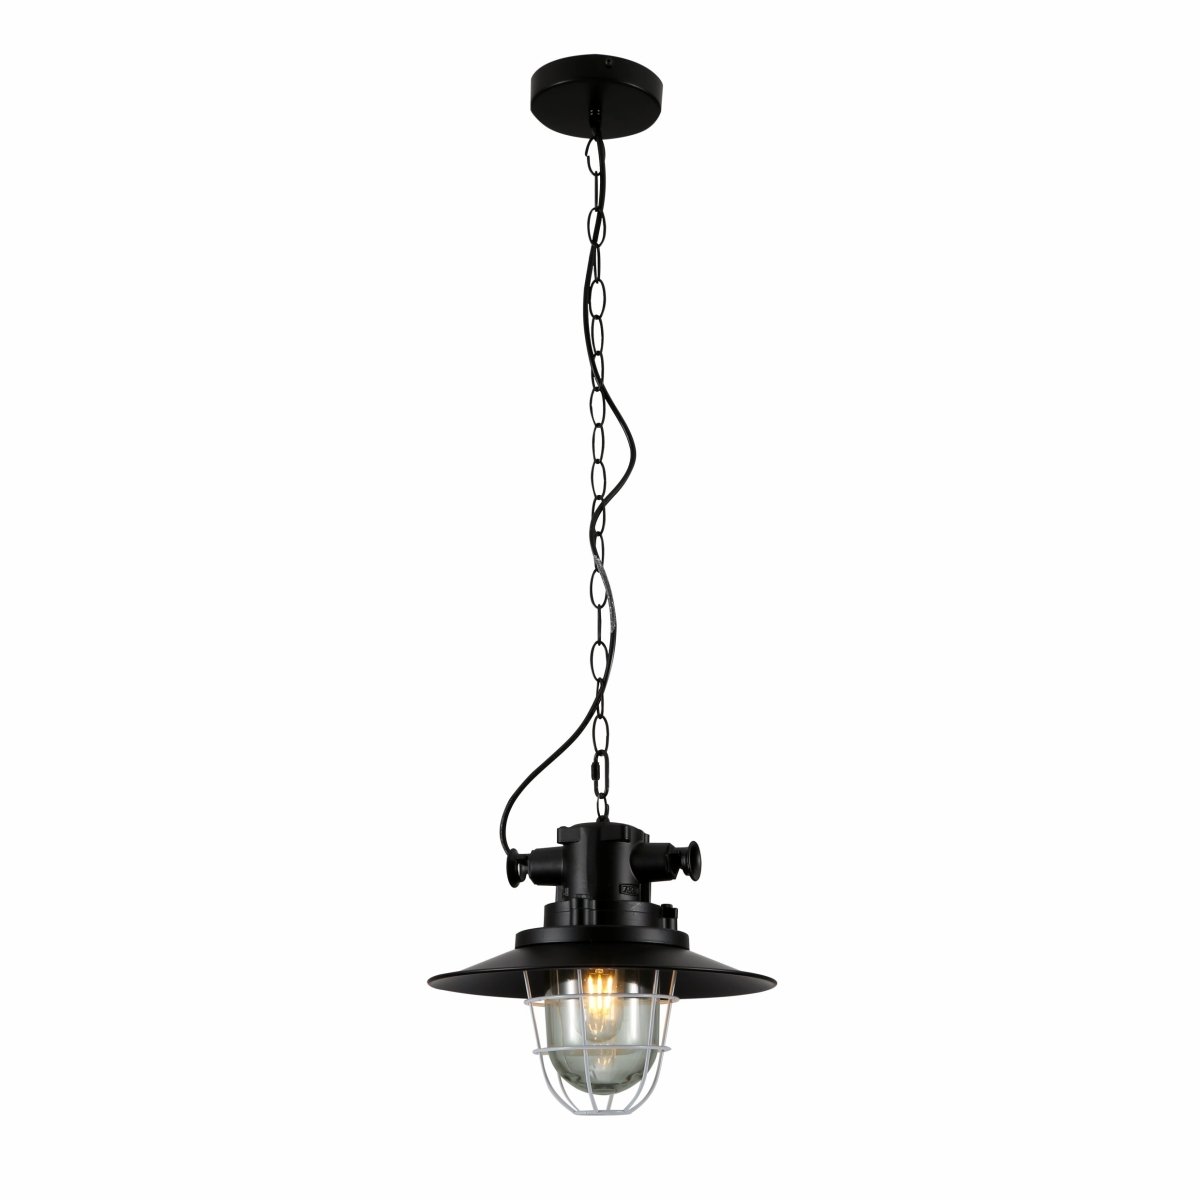 Main image of Black Nautical Industrial Caged Flat Shade Glass Metal Ceiling Pendant Light with E27 Fitting  | TEKLED 150-18366